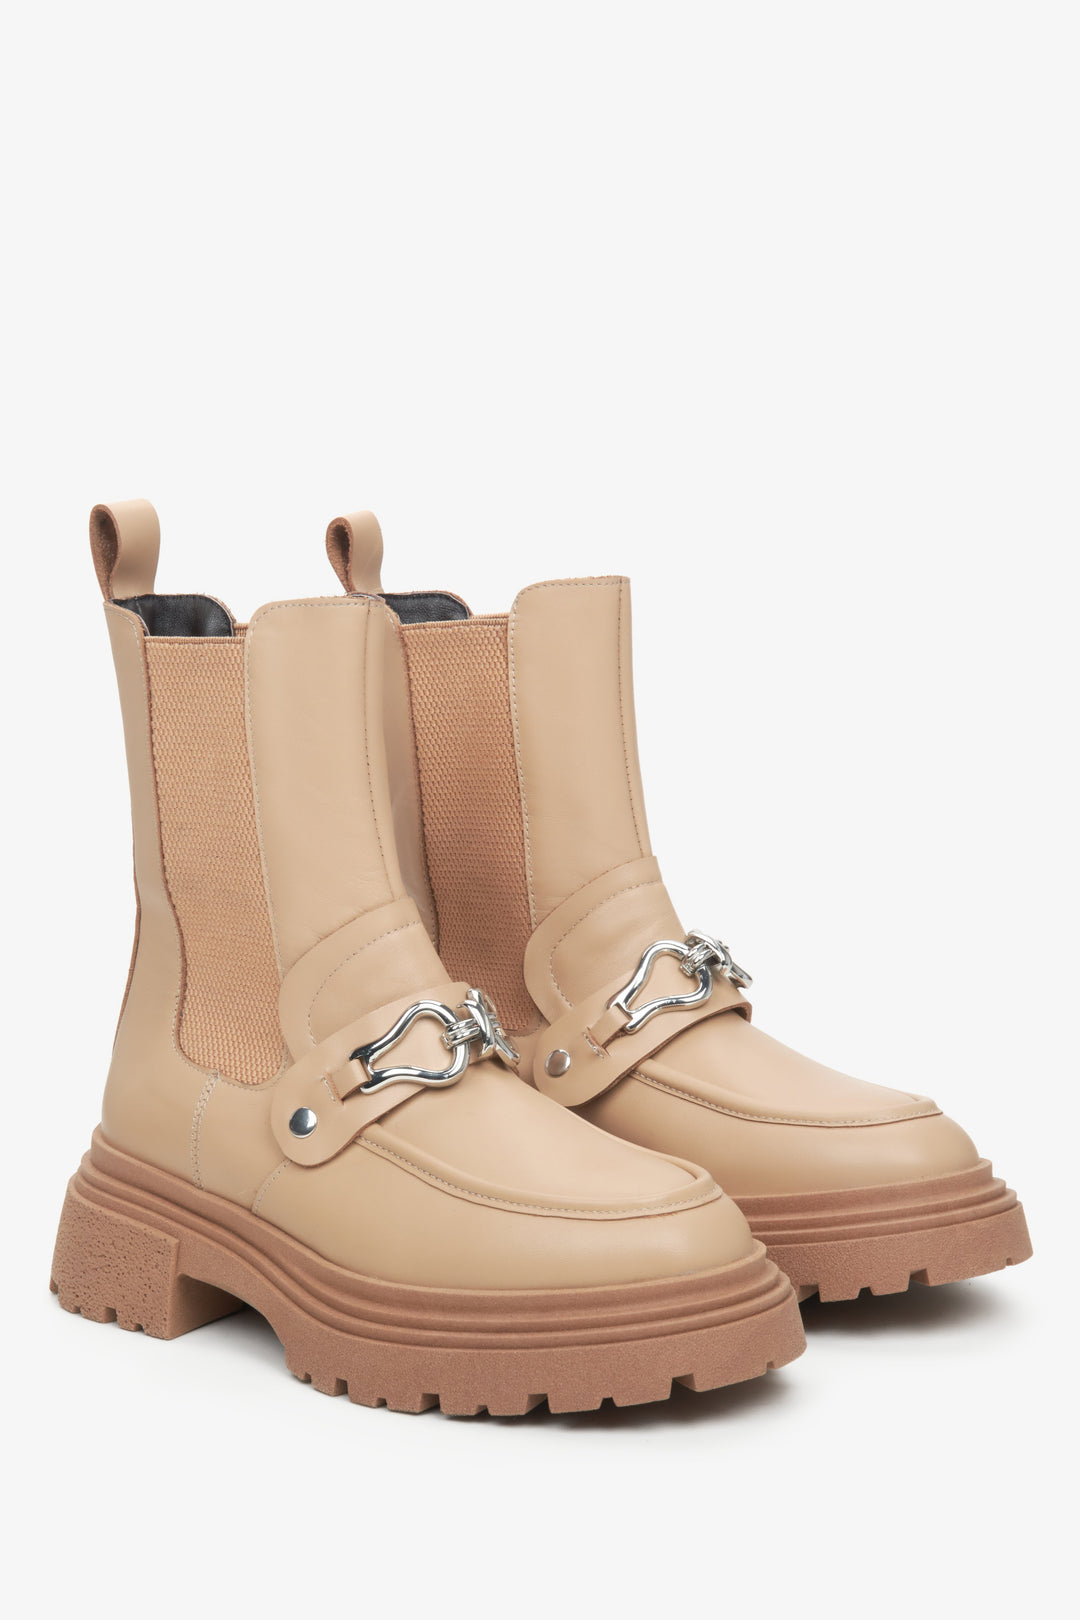 Women's beige leather Chelsea boots with ornament.